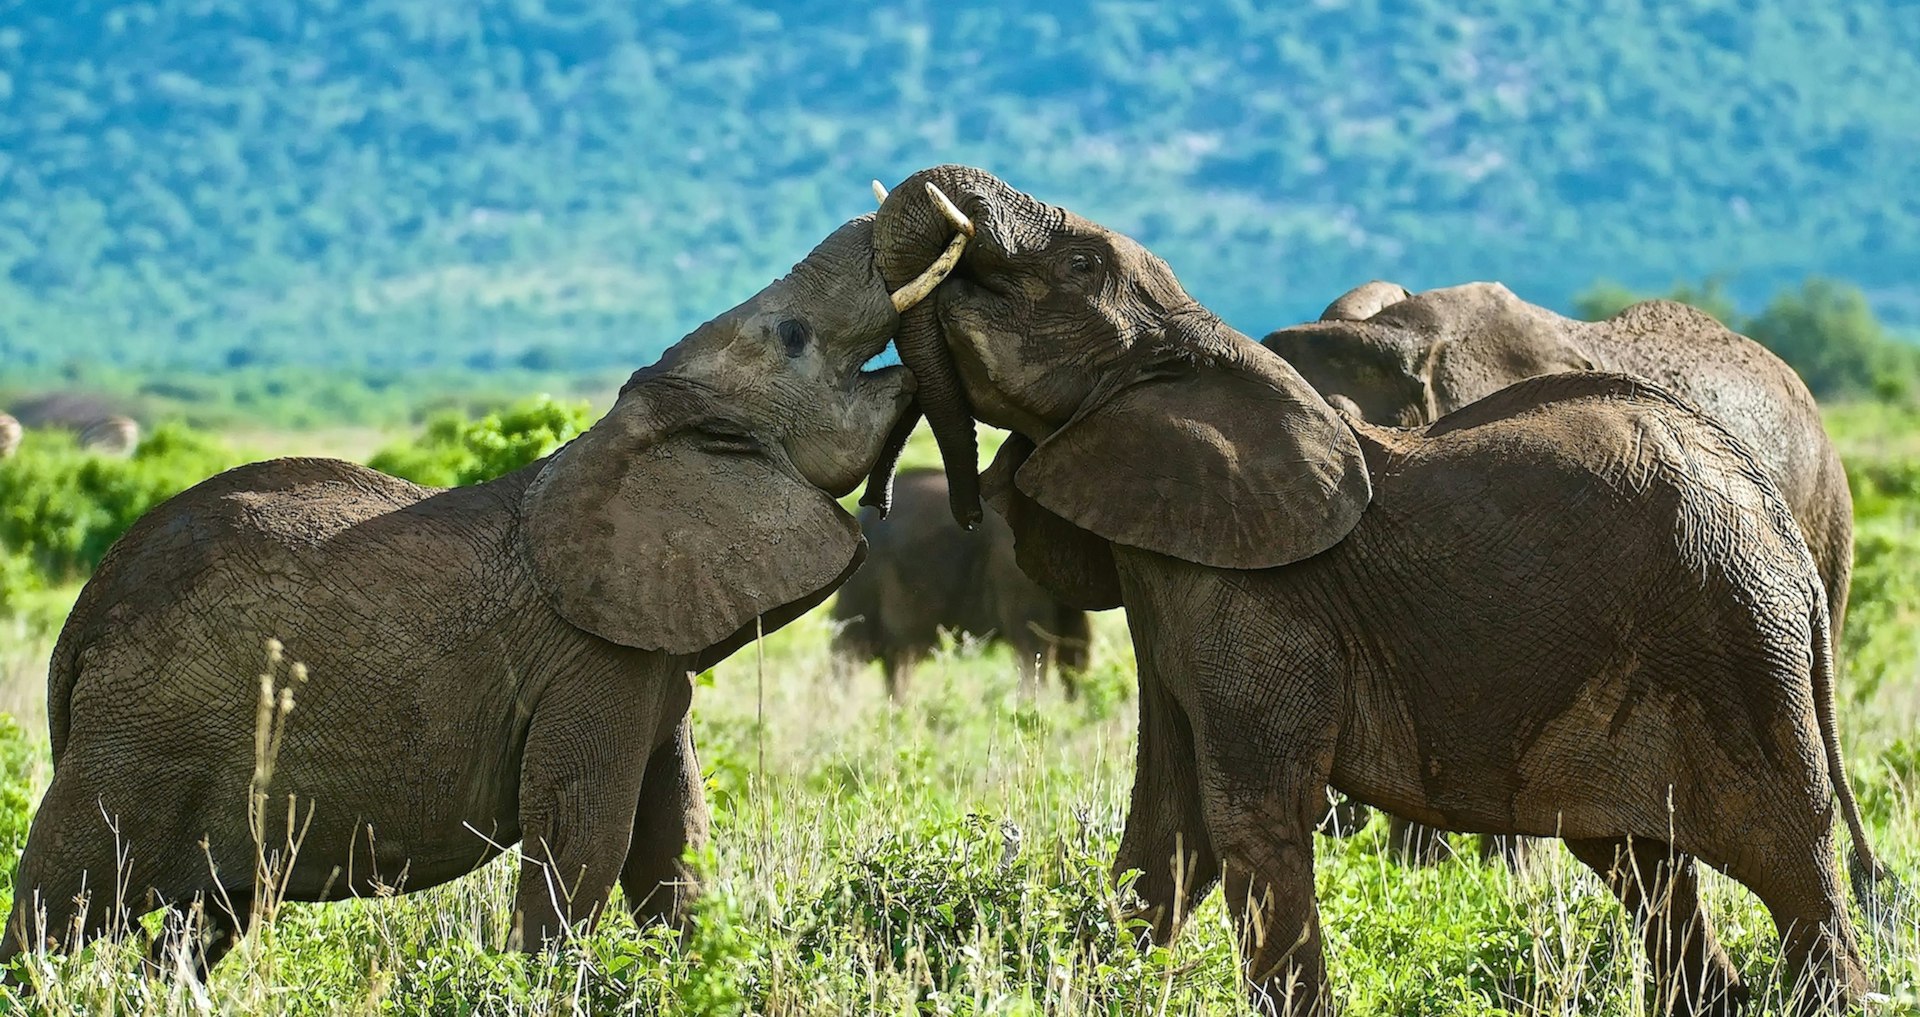 Two young elephants from the herd play to test their strength